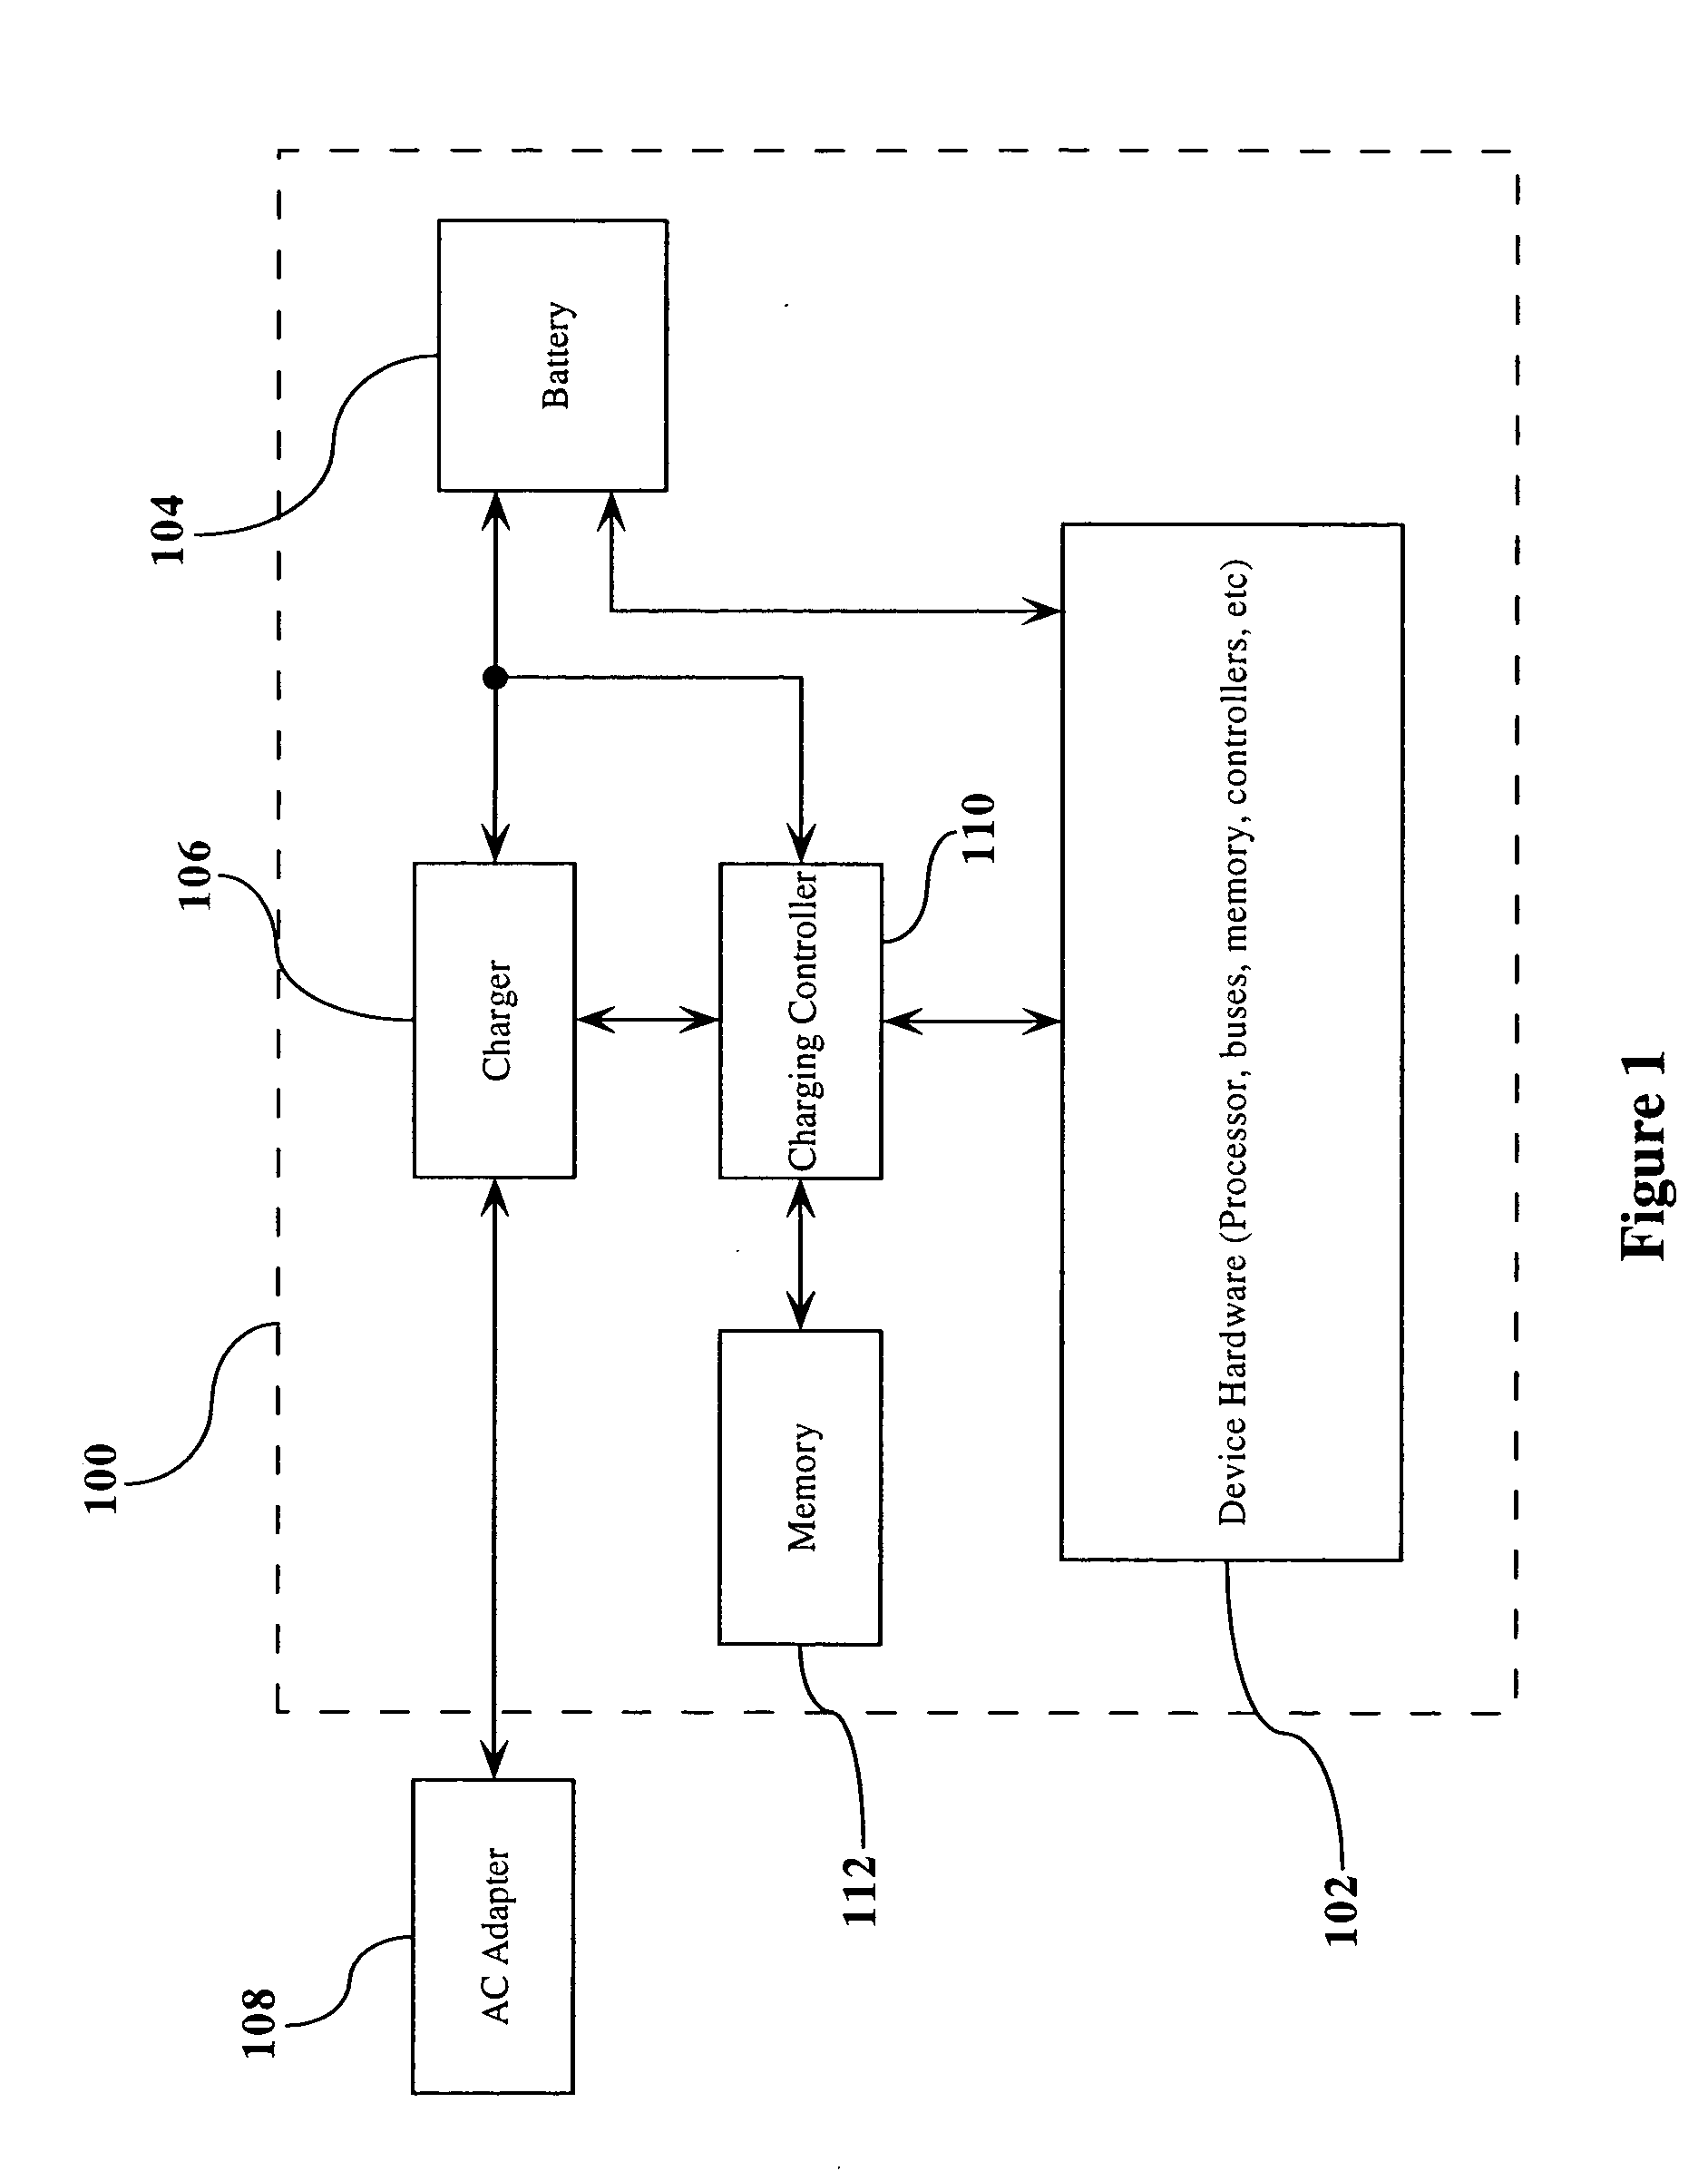 Smart battery charging system, method, and computer program product